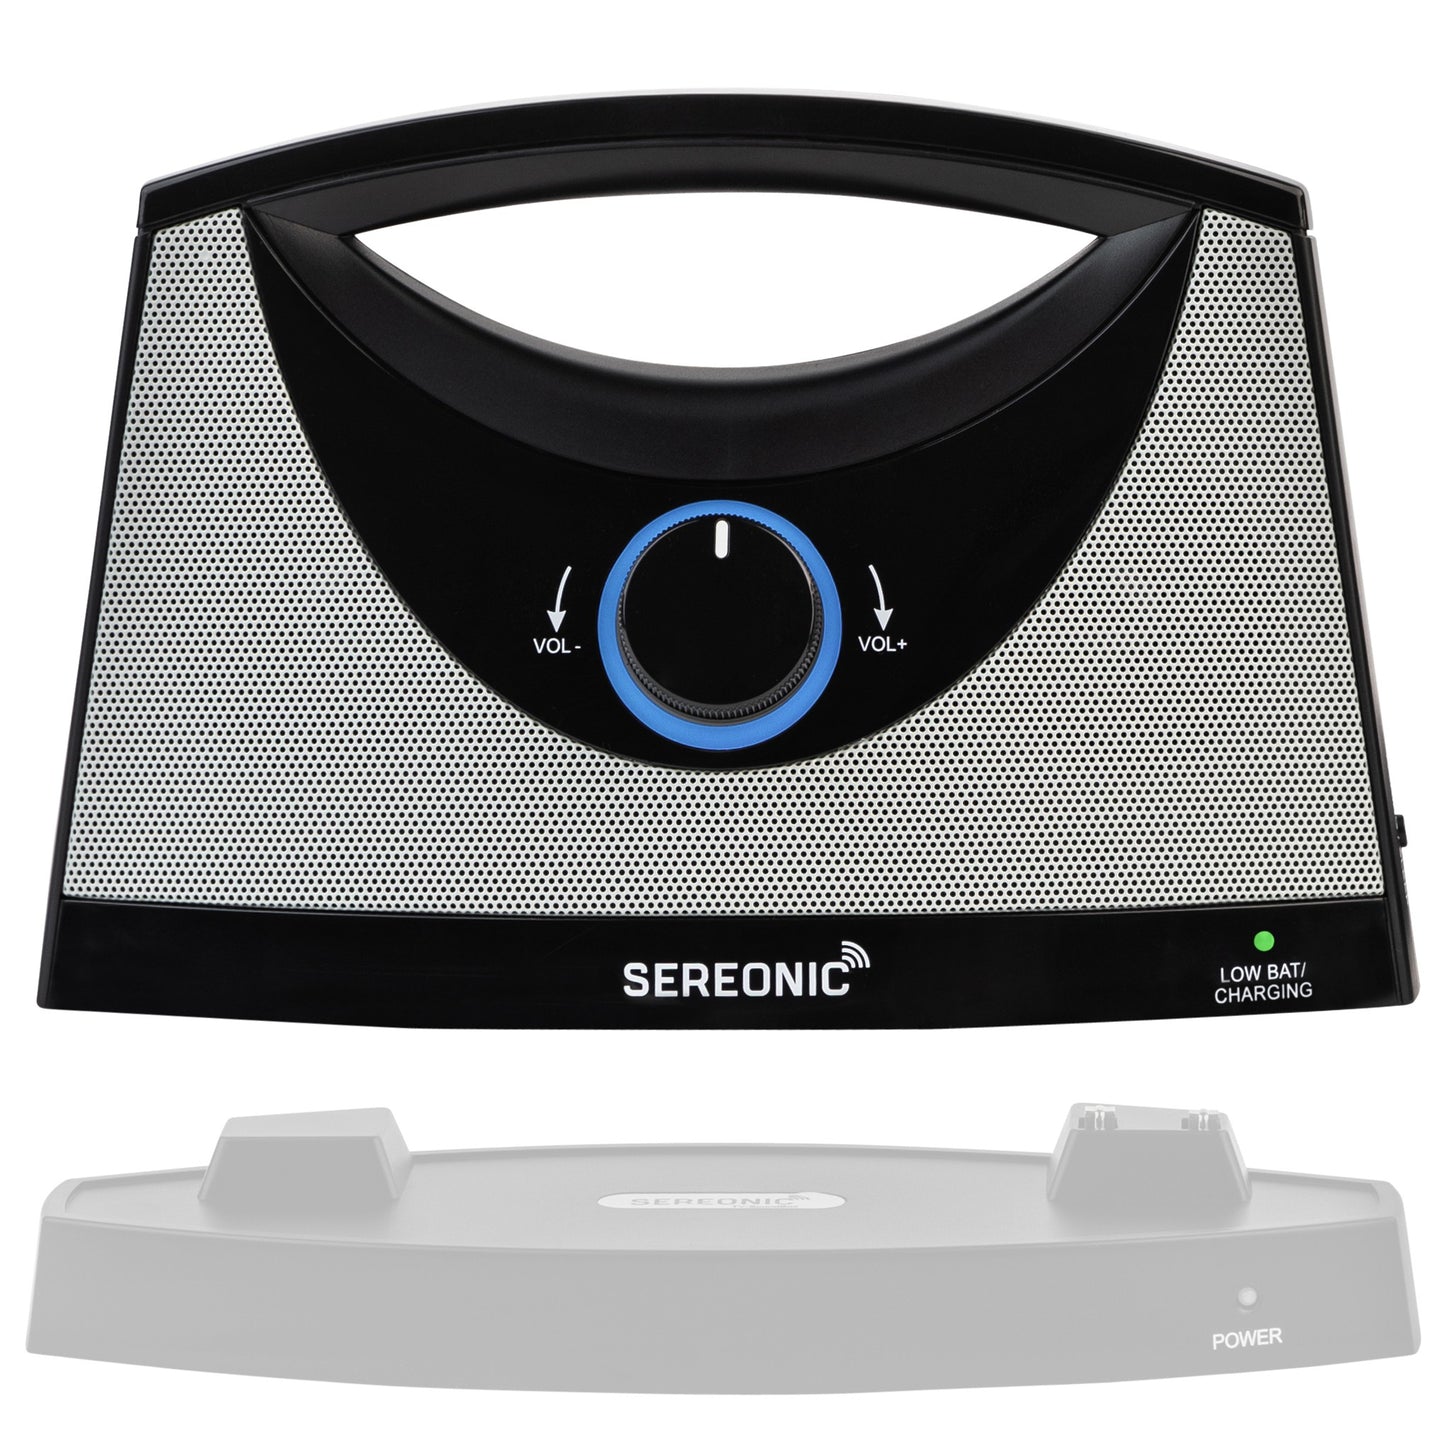 Extra Speaker Receiver Only for SEREONIC Wireless TV Speaker System – TRANSMITTING Base and Audio Cables NOT Included – Pairs with BT-200 for Use of Multiple Speakers Around The House (BT-200 is required)